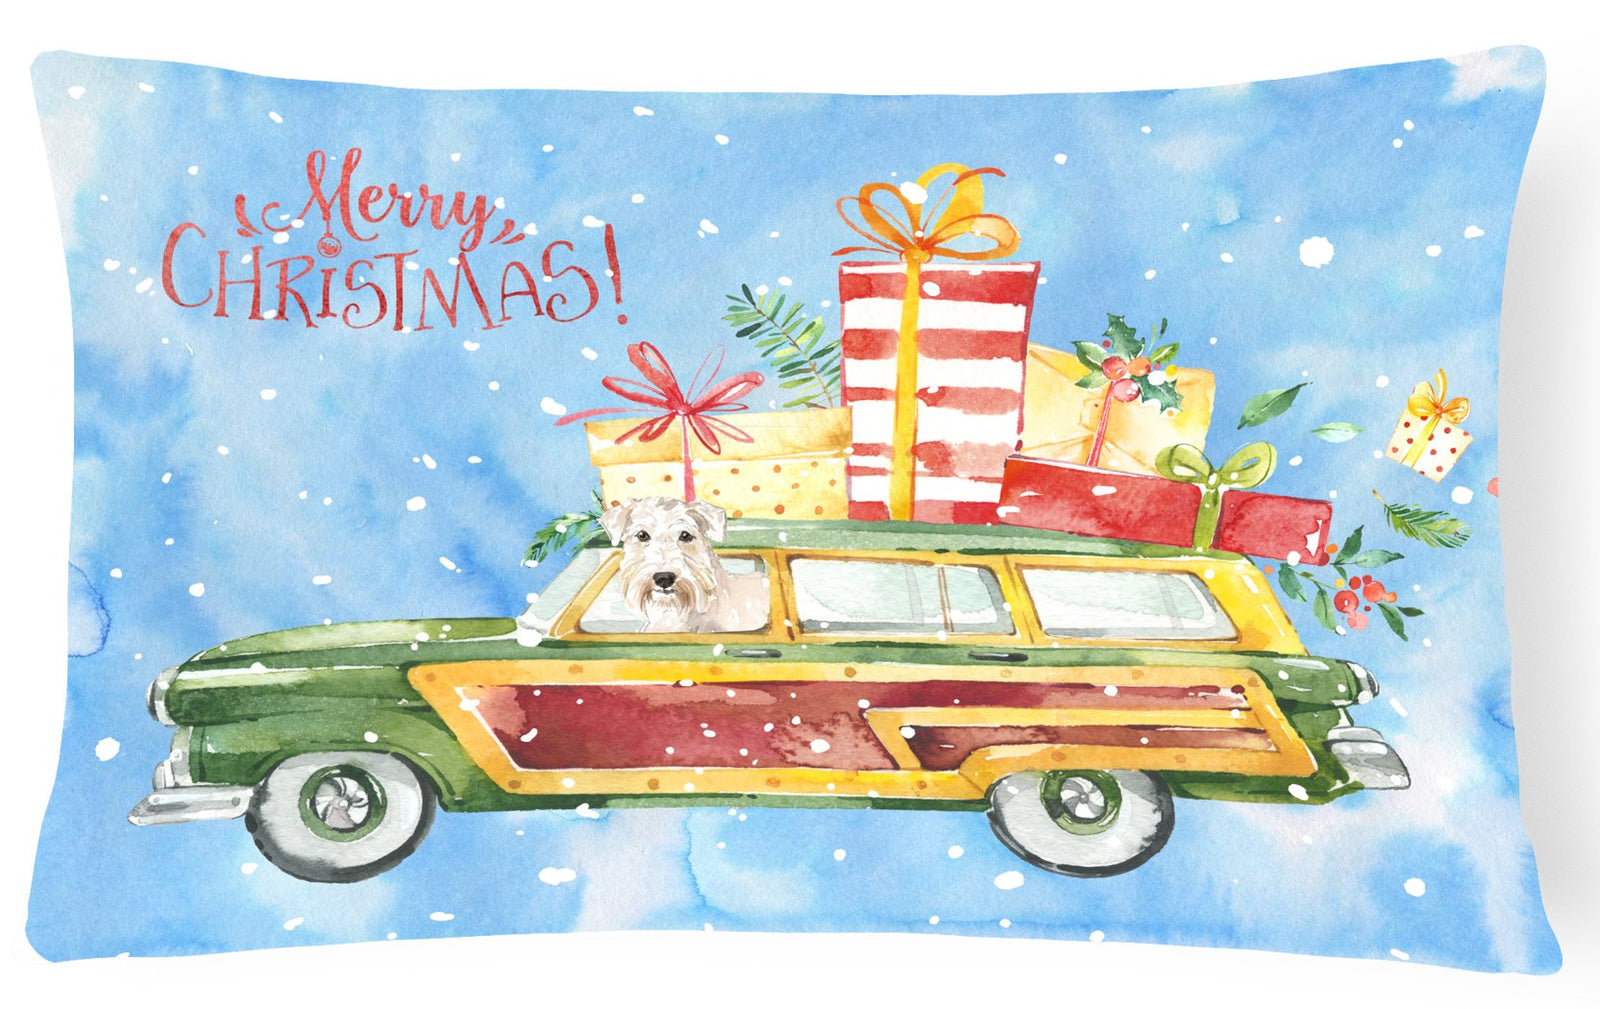 Merry Christmas Wheaten Terrier Canvas Fabric Decorative Pillow CK2428PW1216 by Caroline's Treasures